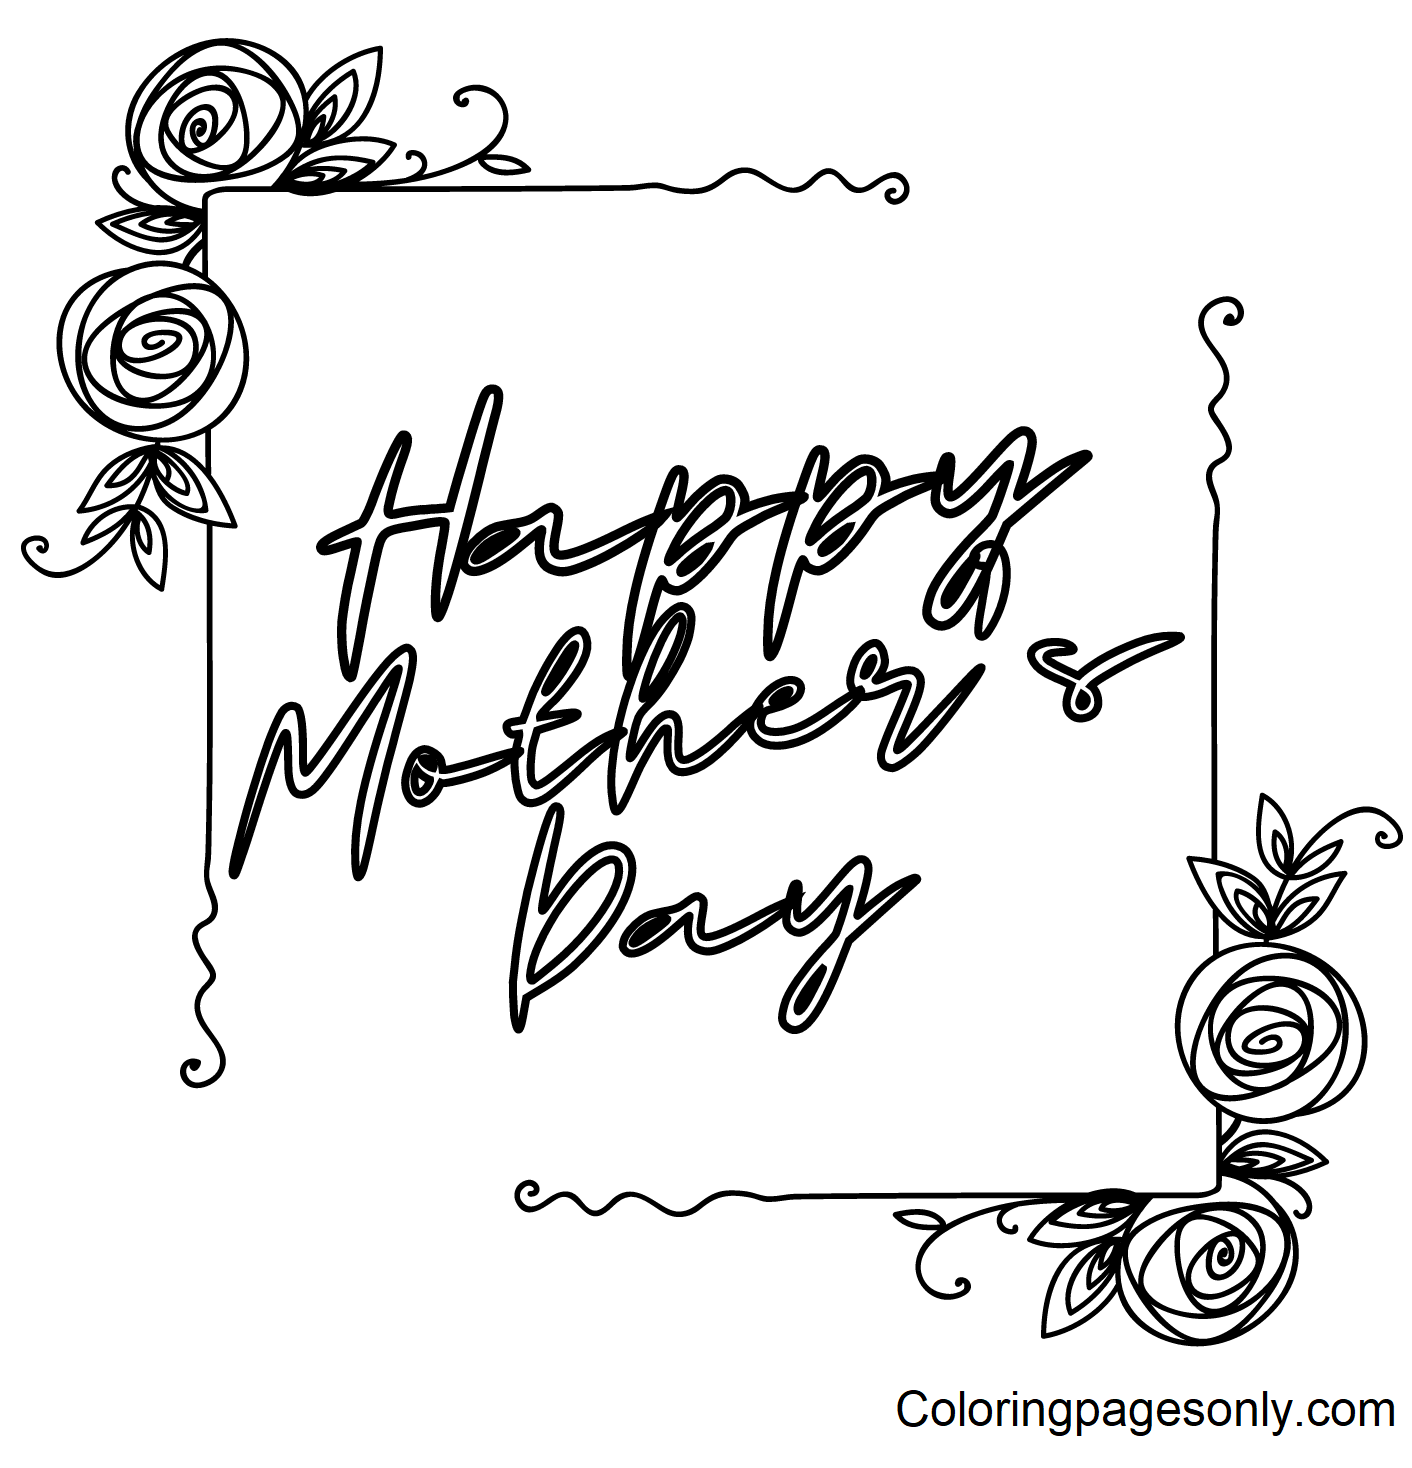 Happy Mothers Day Pictures to Print Coloring Page